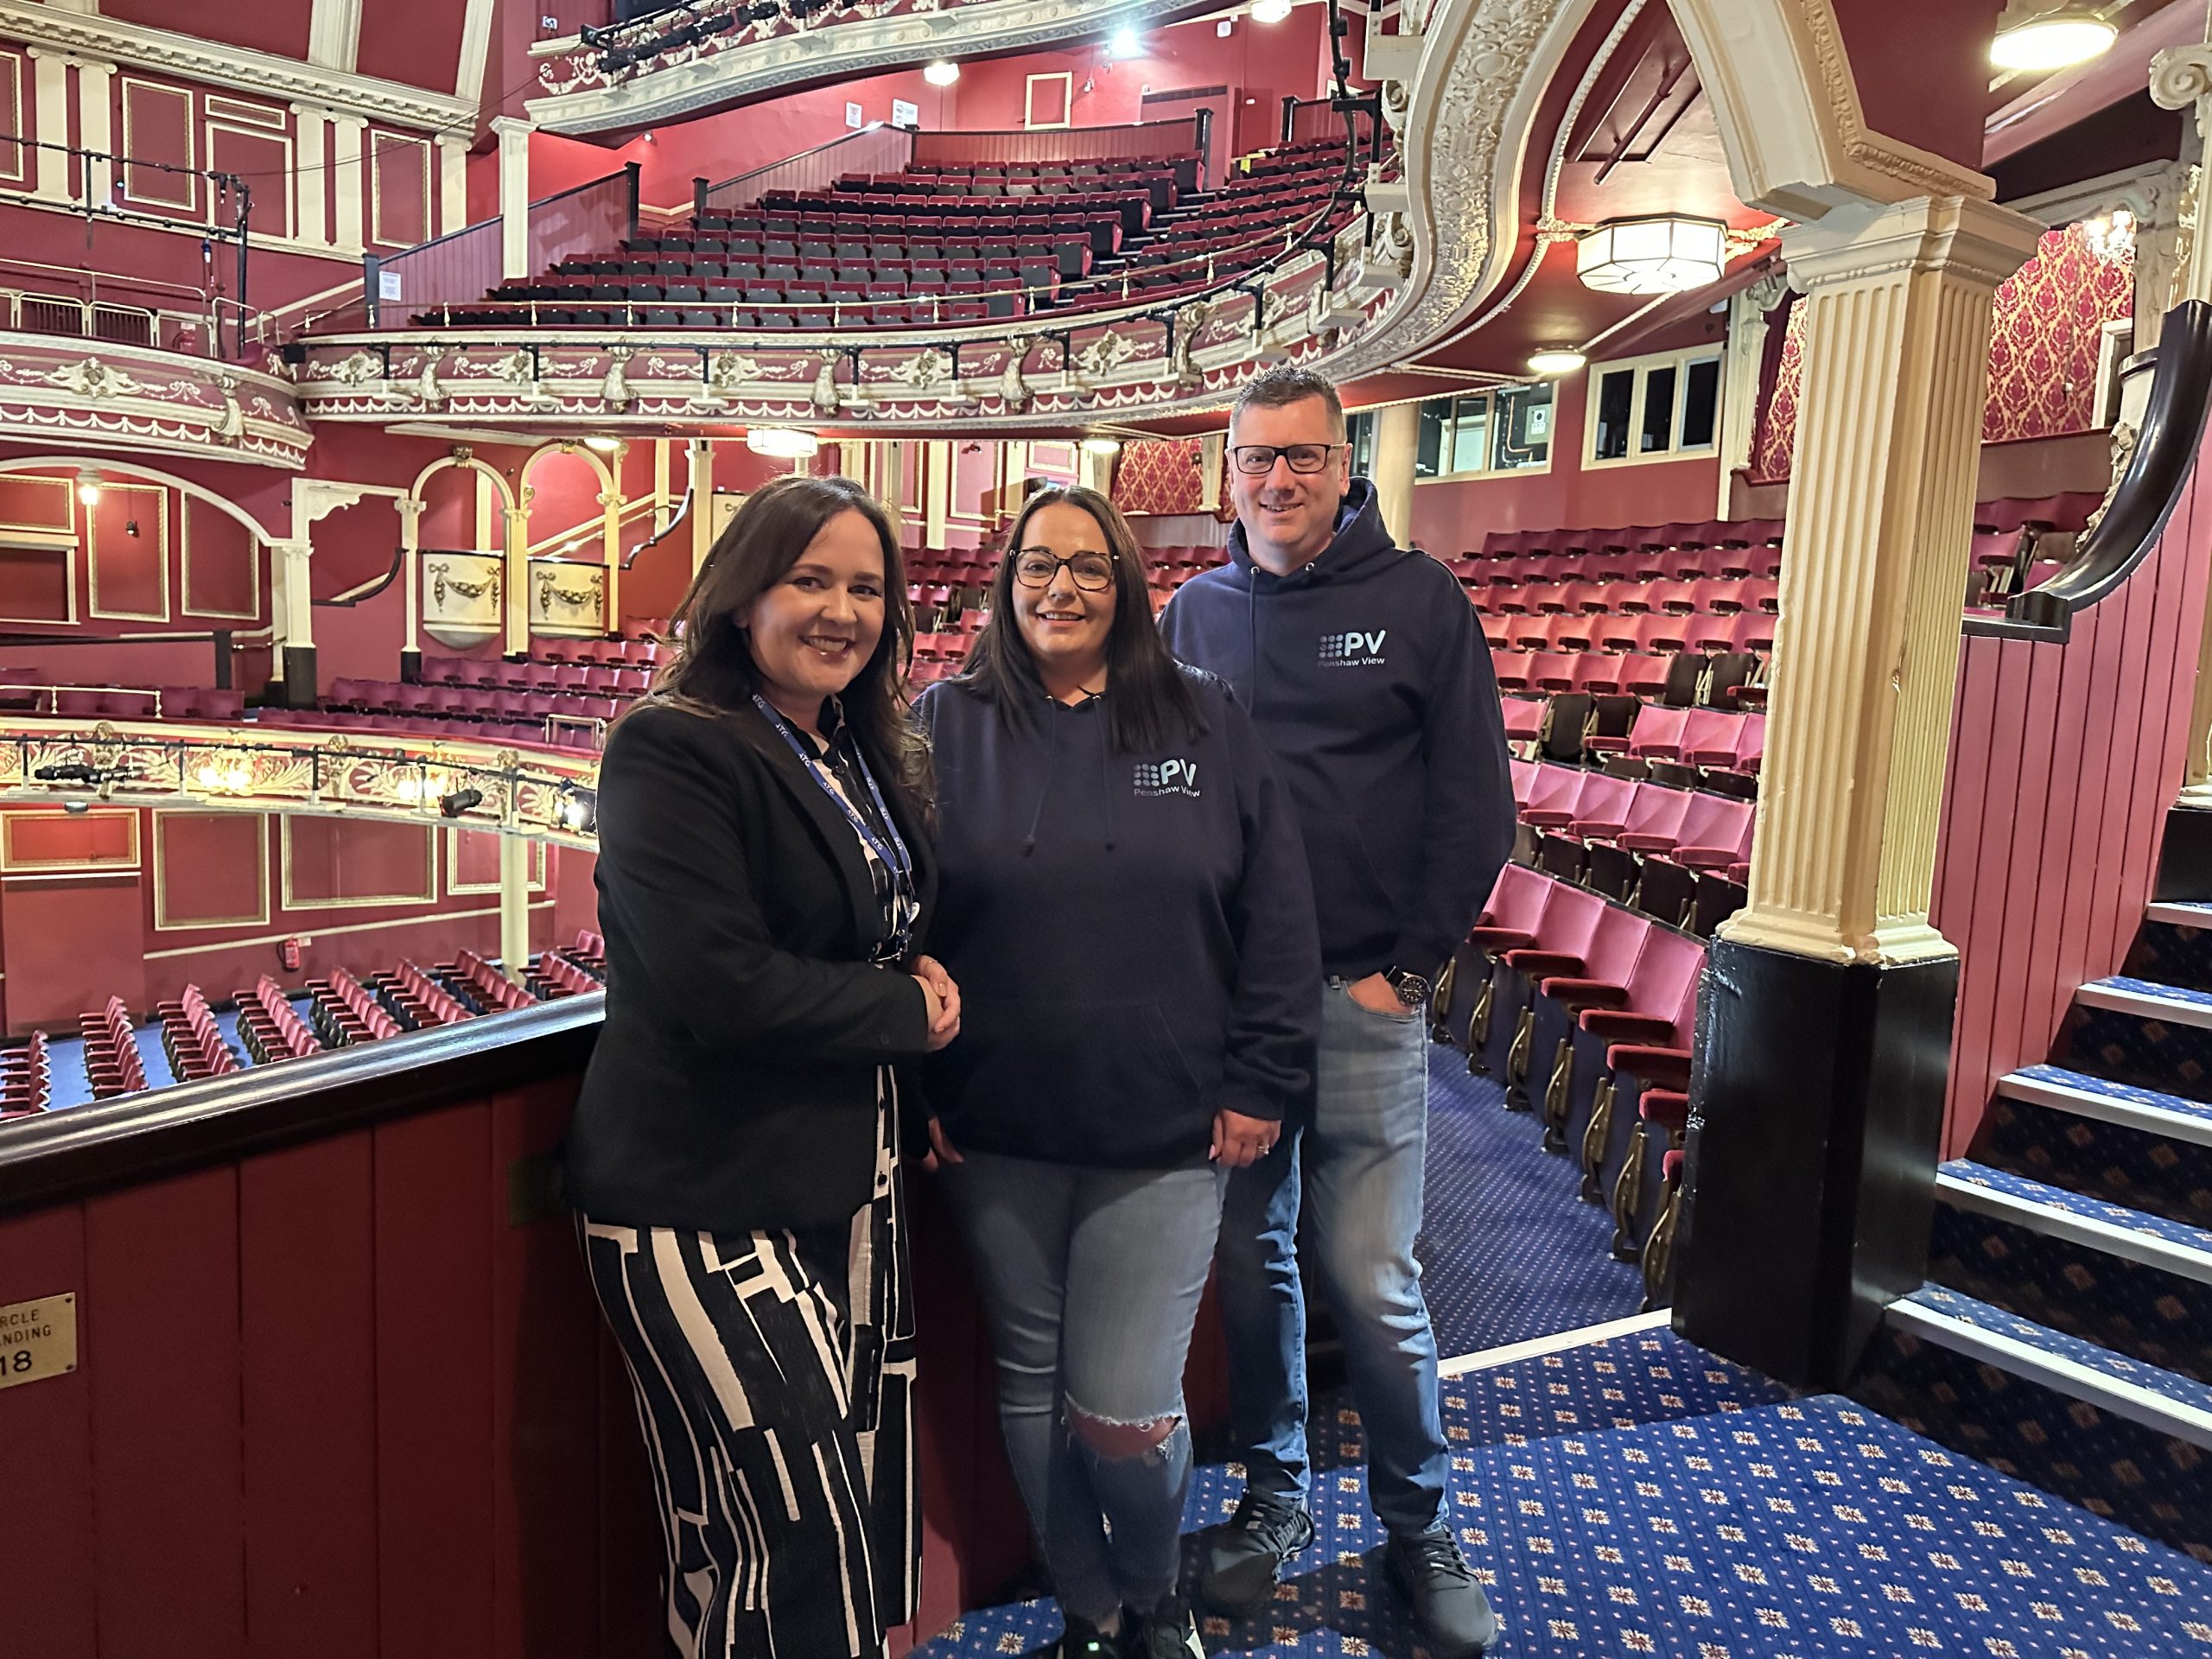 Three people stood smiling to camera inside the Sunderland Empire theatre which has traditional red seats and royal blue carpets.